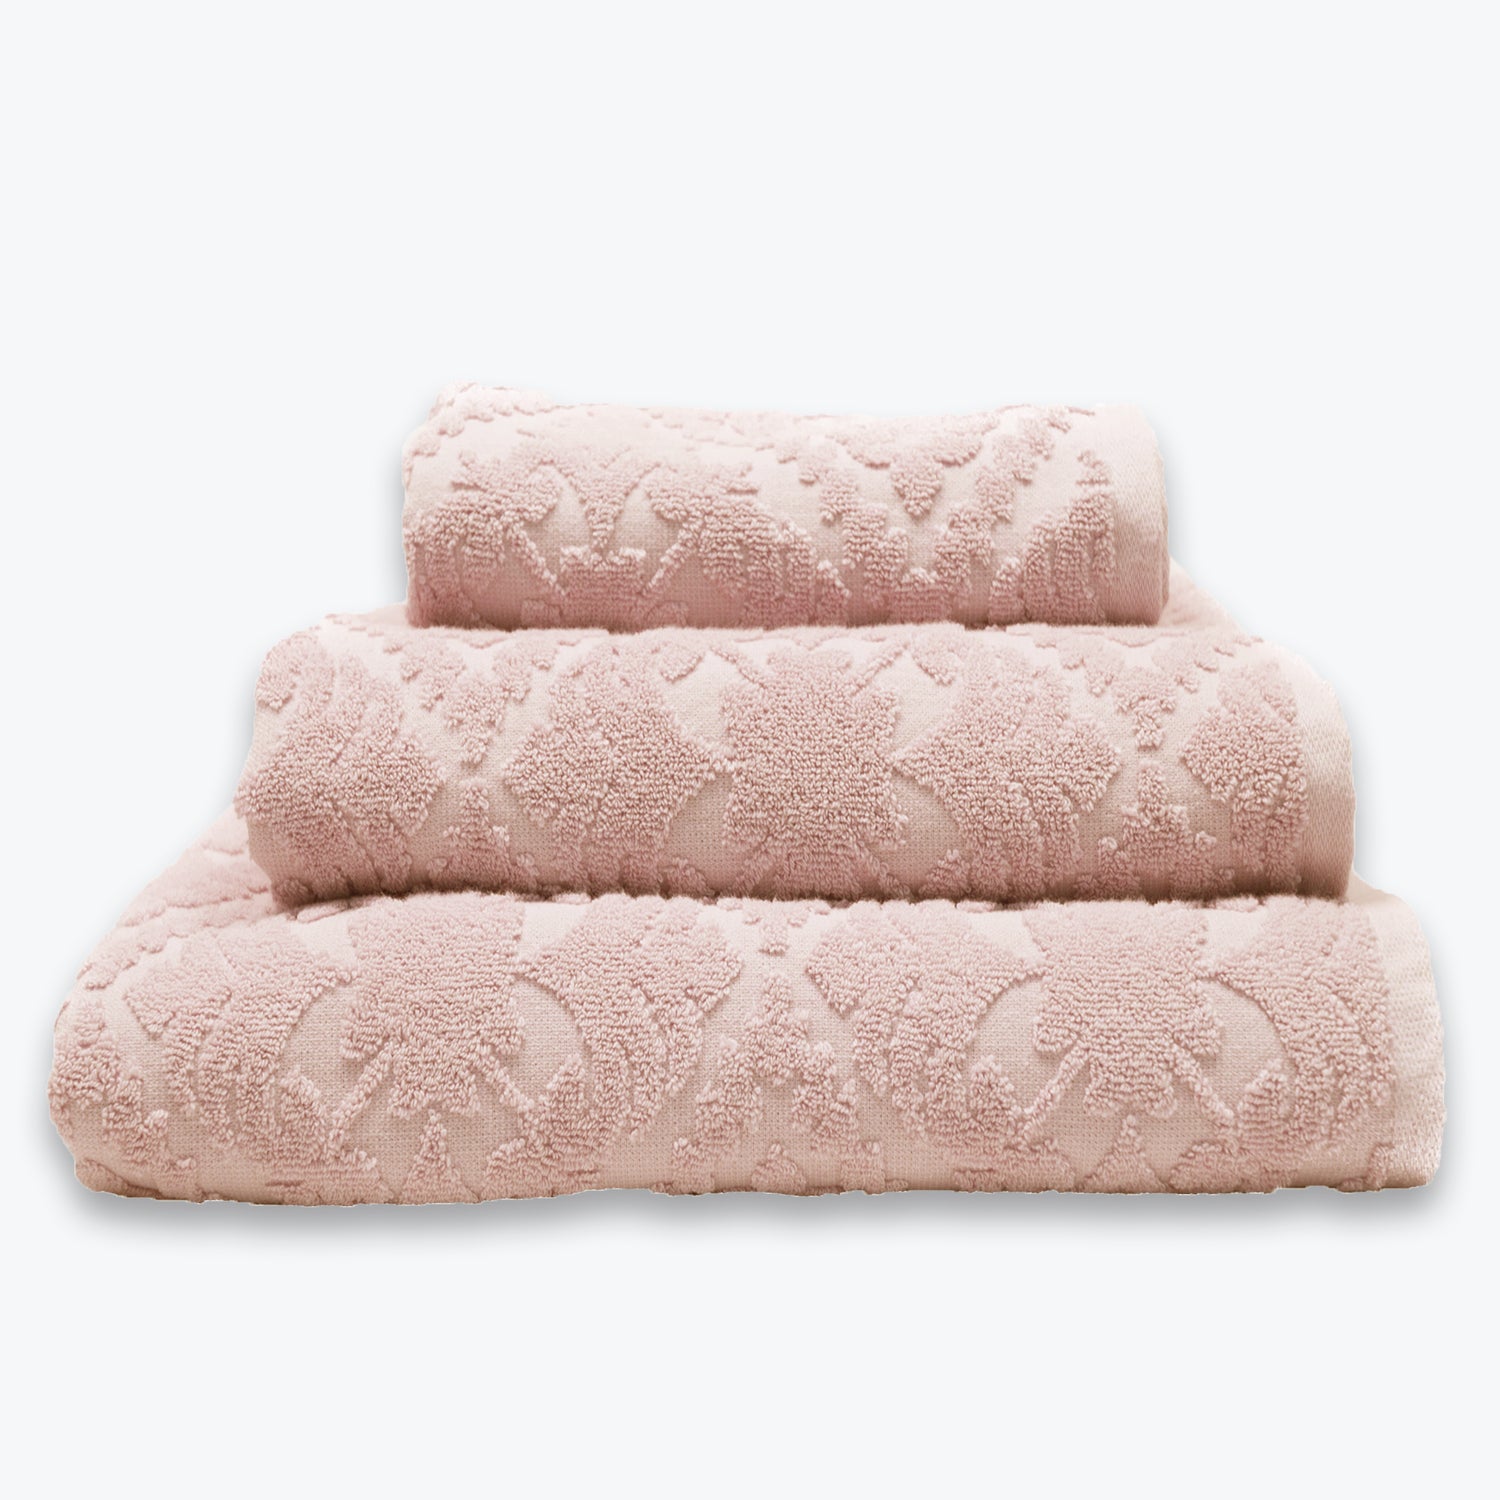 Blush Pink Country House Towel Set - Floral Textured Bathroom Towels